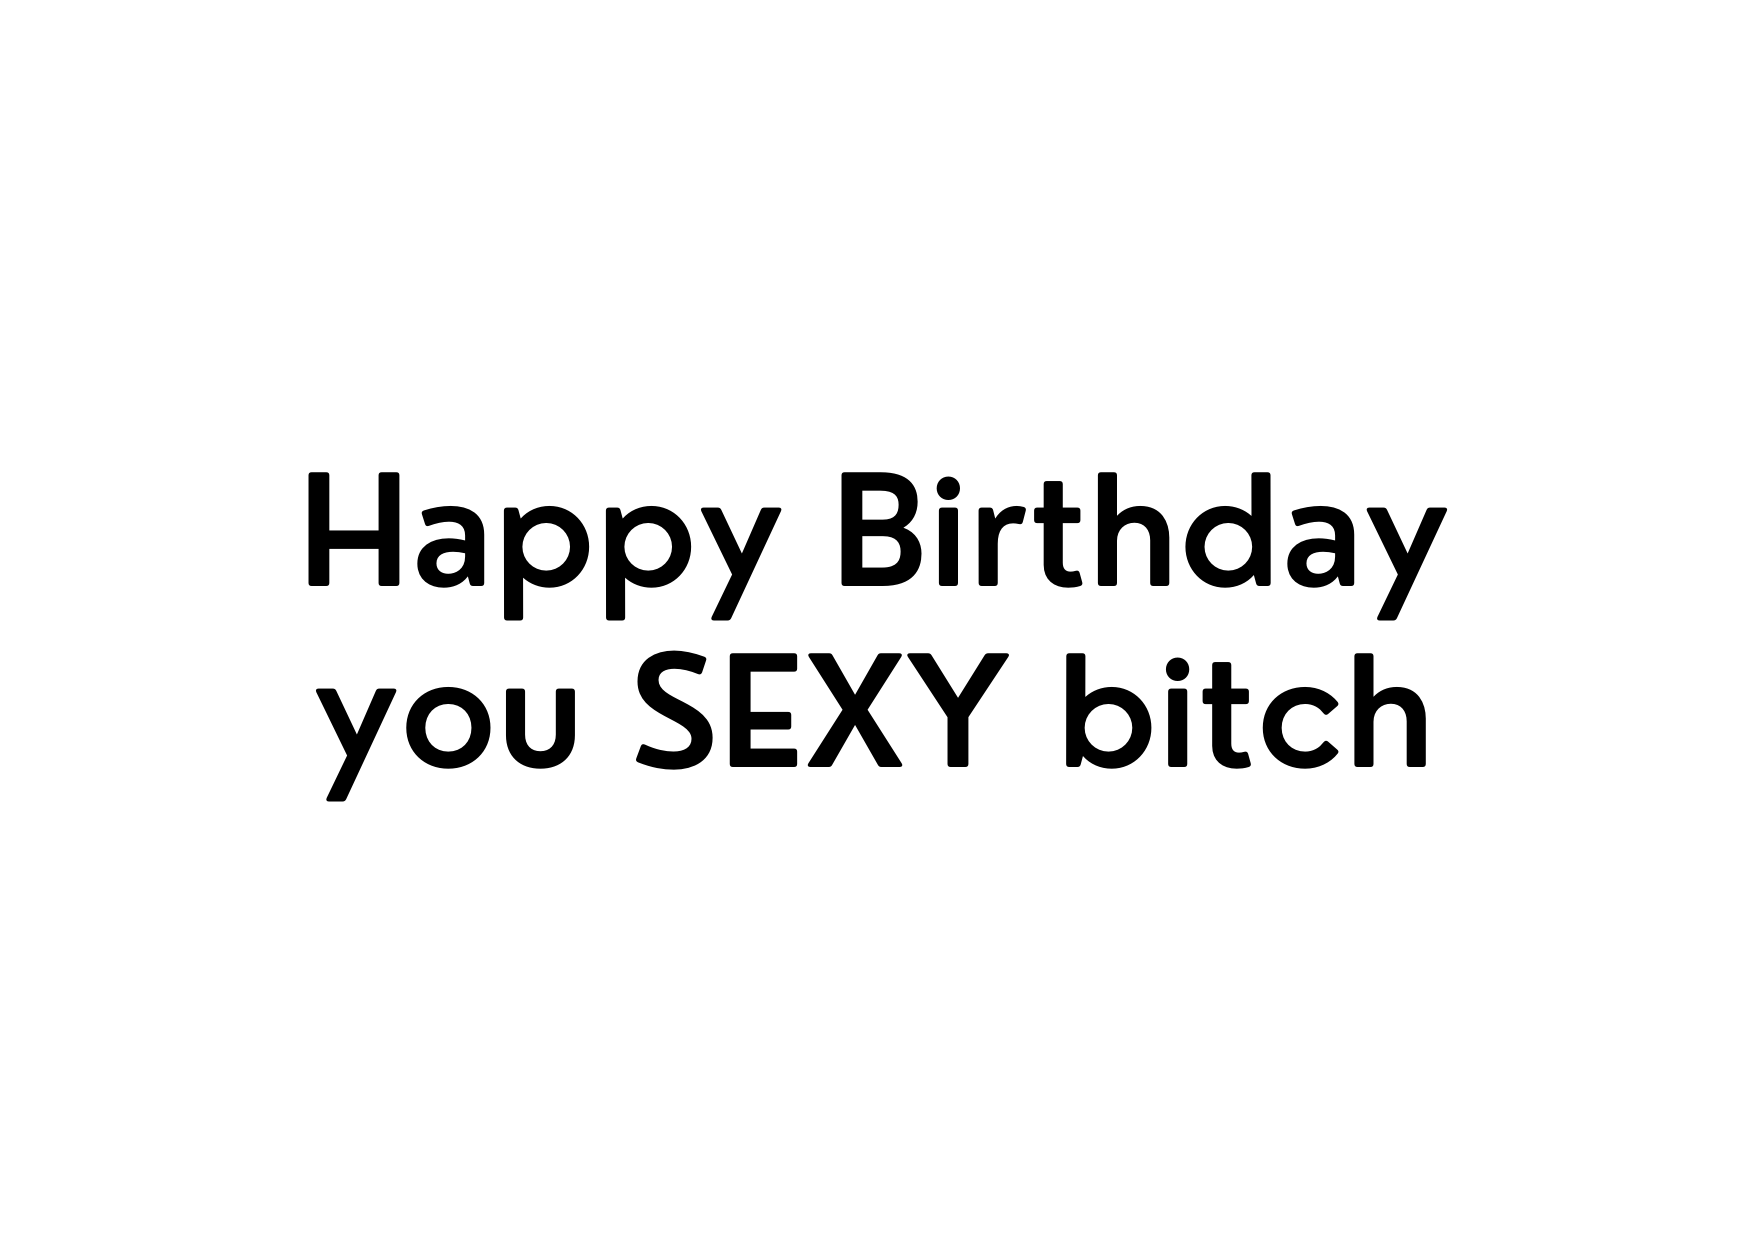 White seed paper greeting card saying "Happy Birthday you sexy bitch"